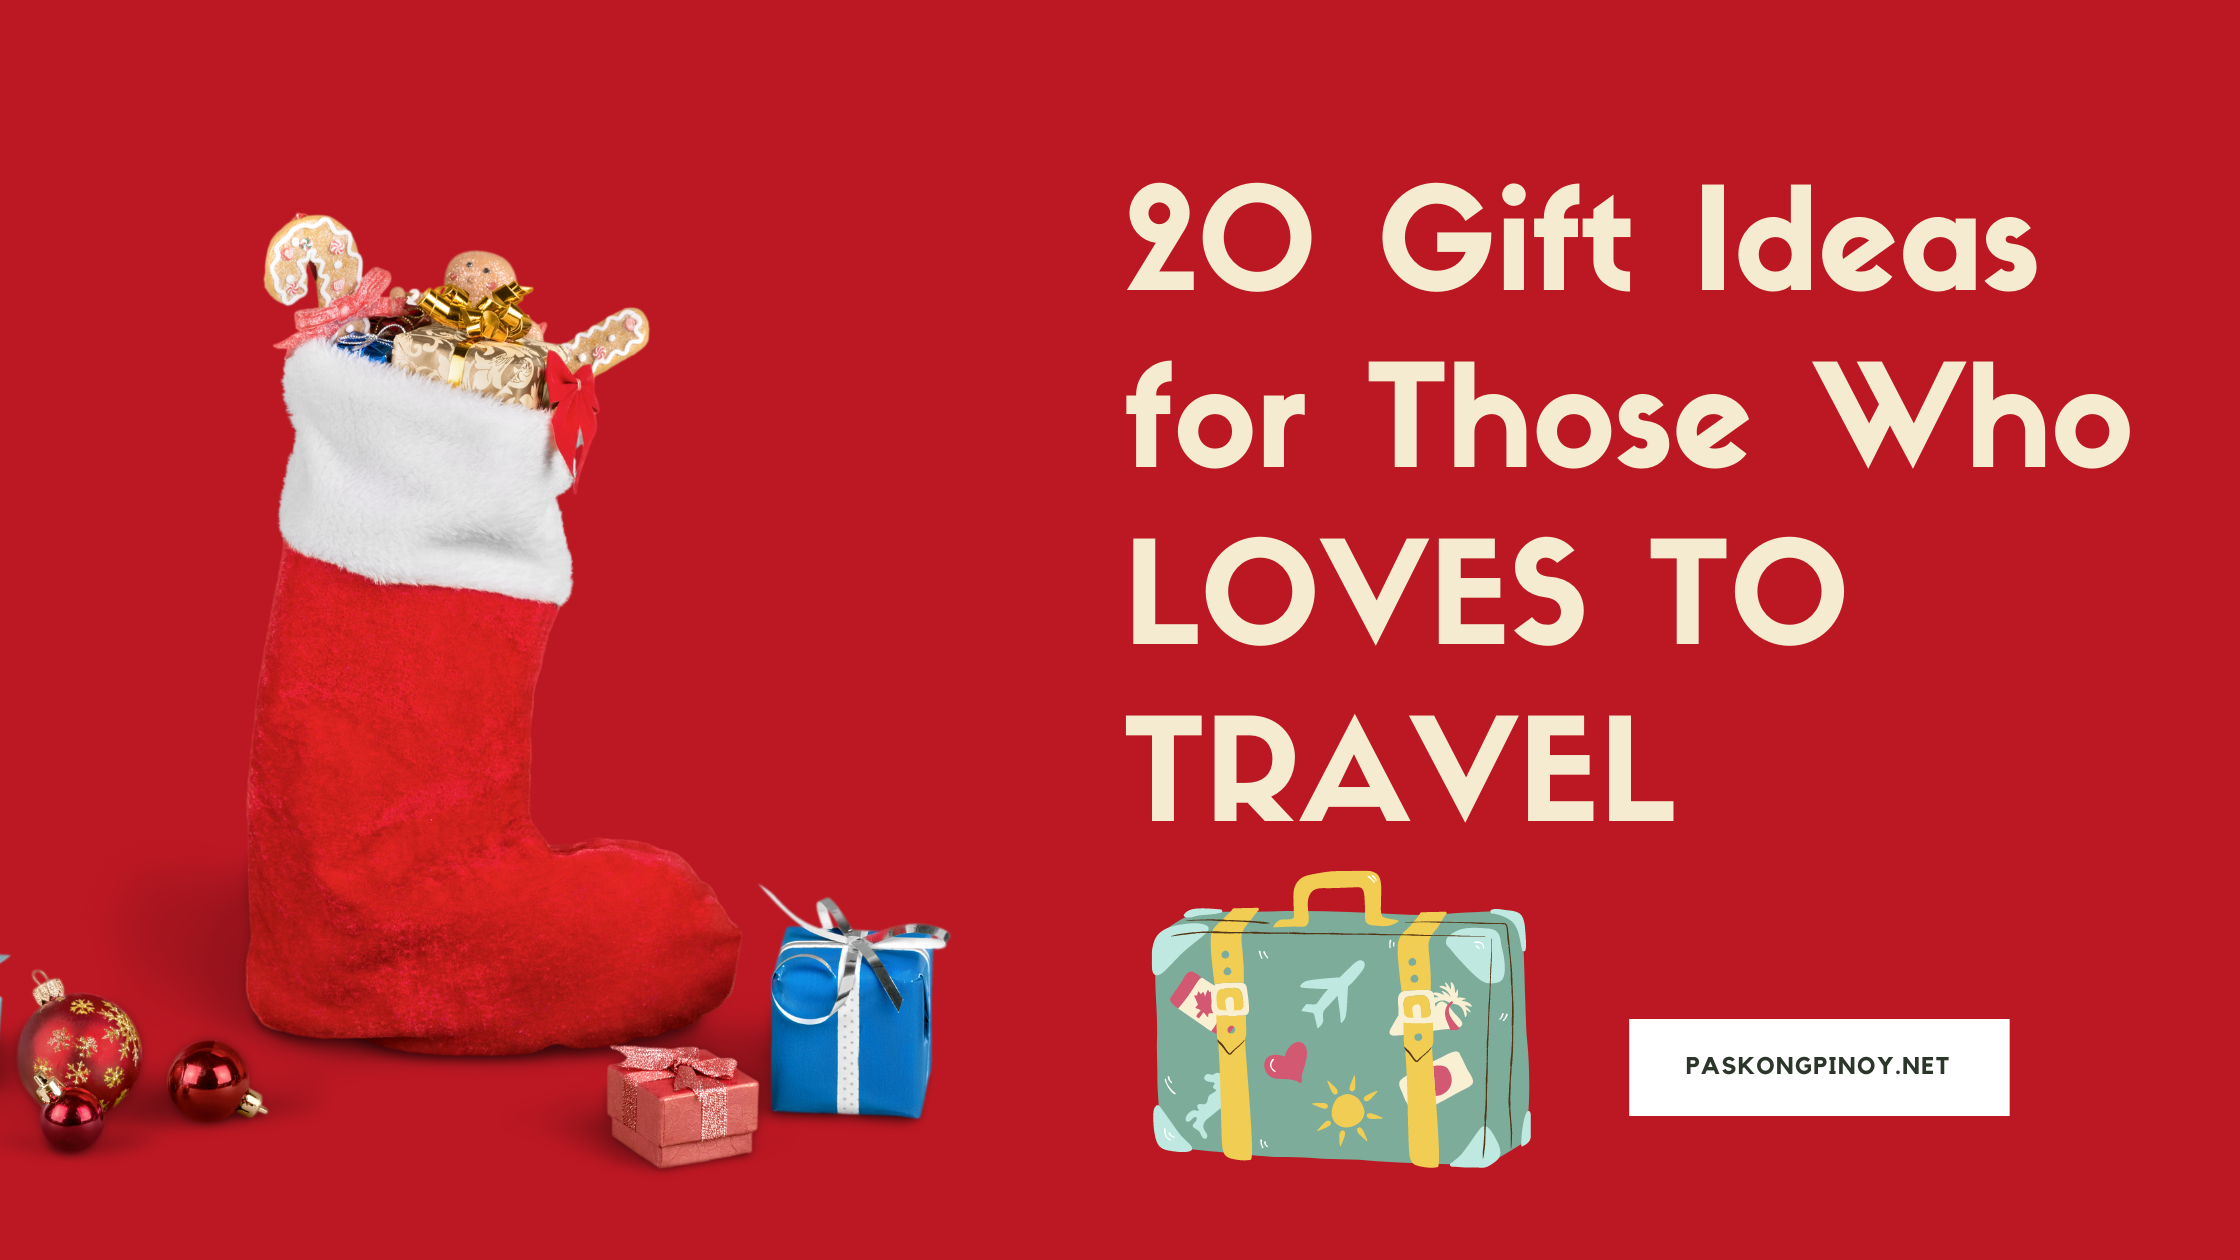 gifts for travelers